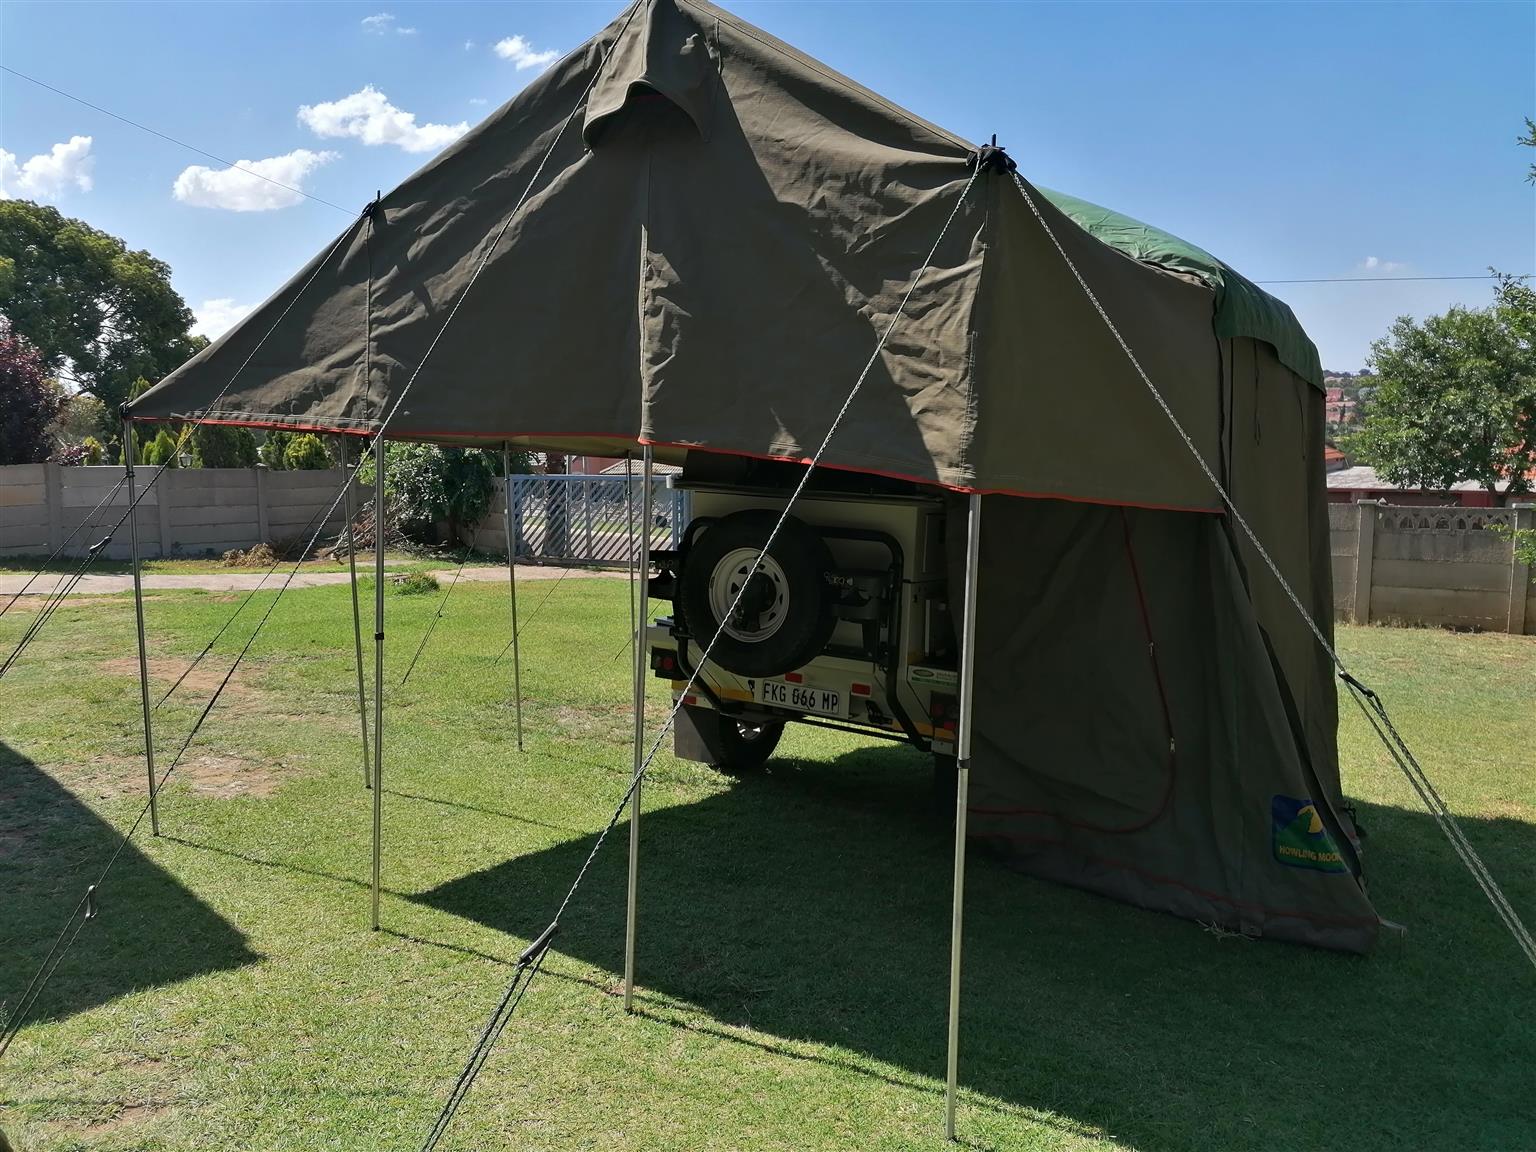 XT140 in excellent condition with Howling moon tent, complete with side panels.